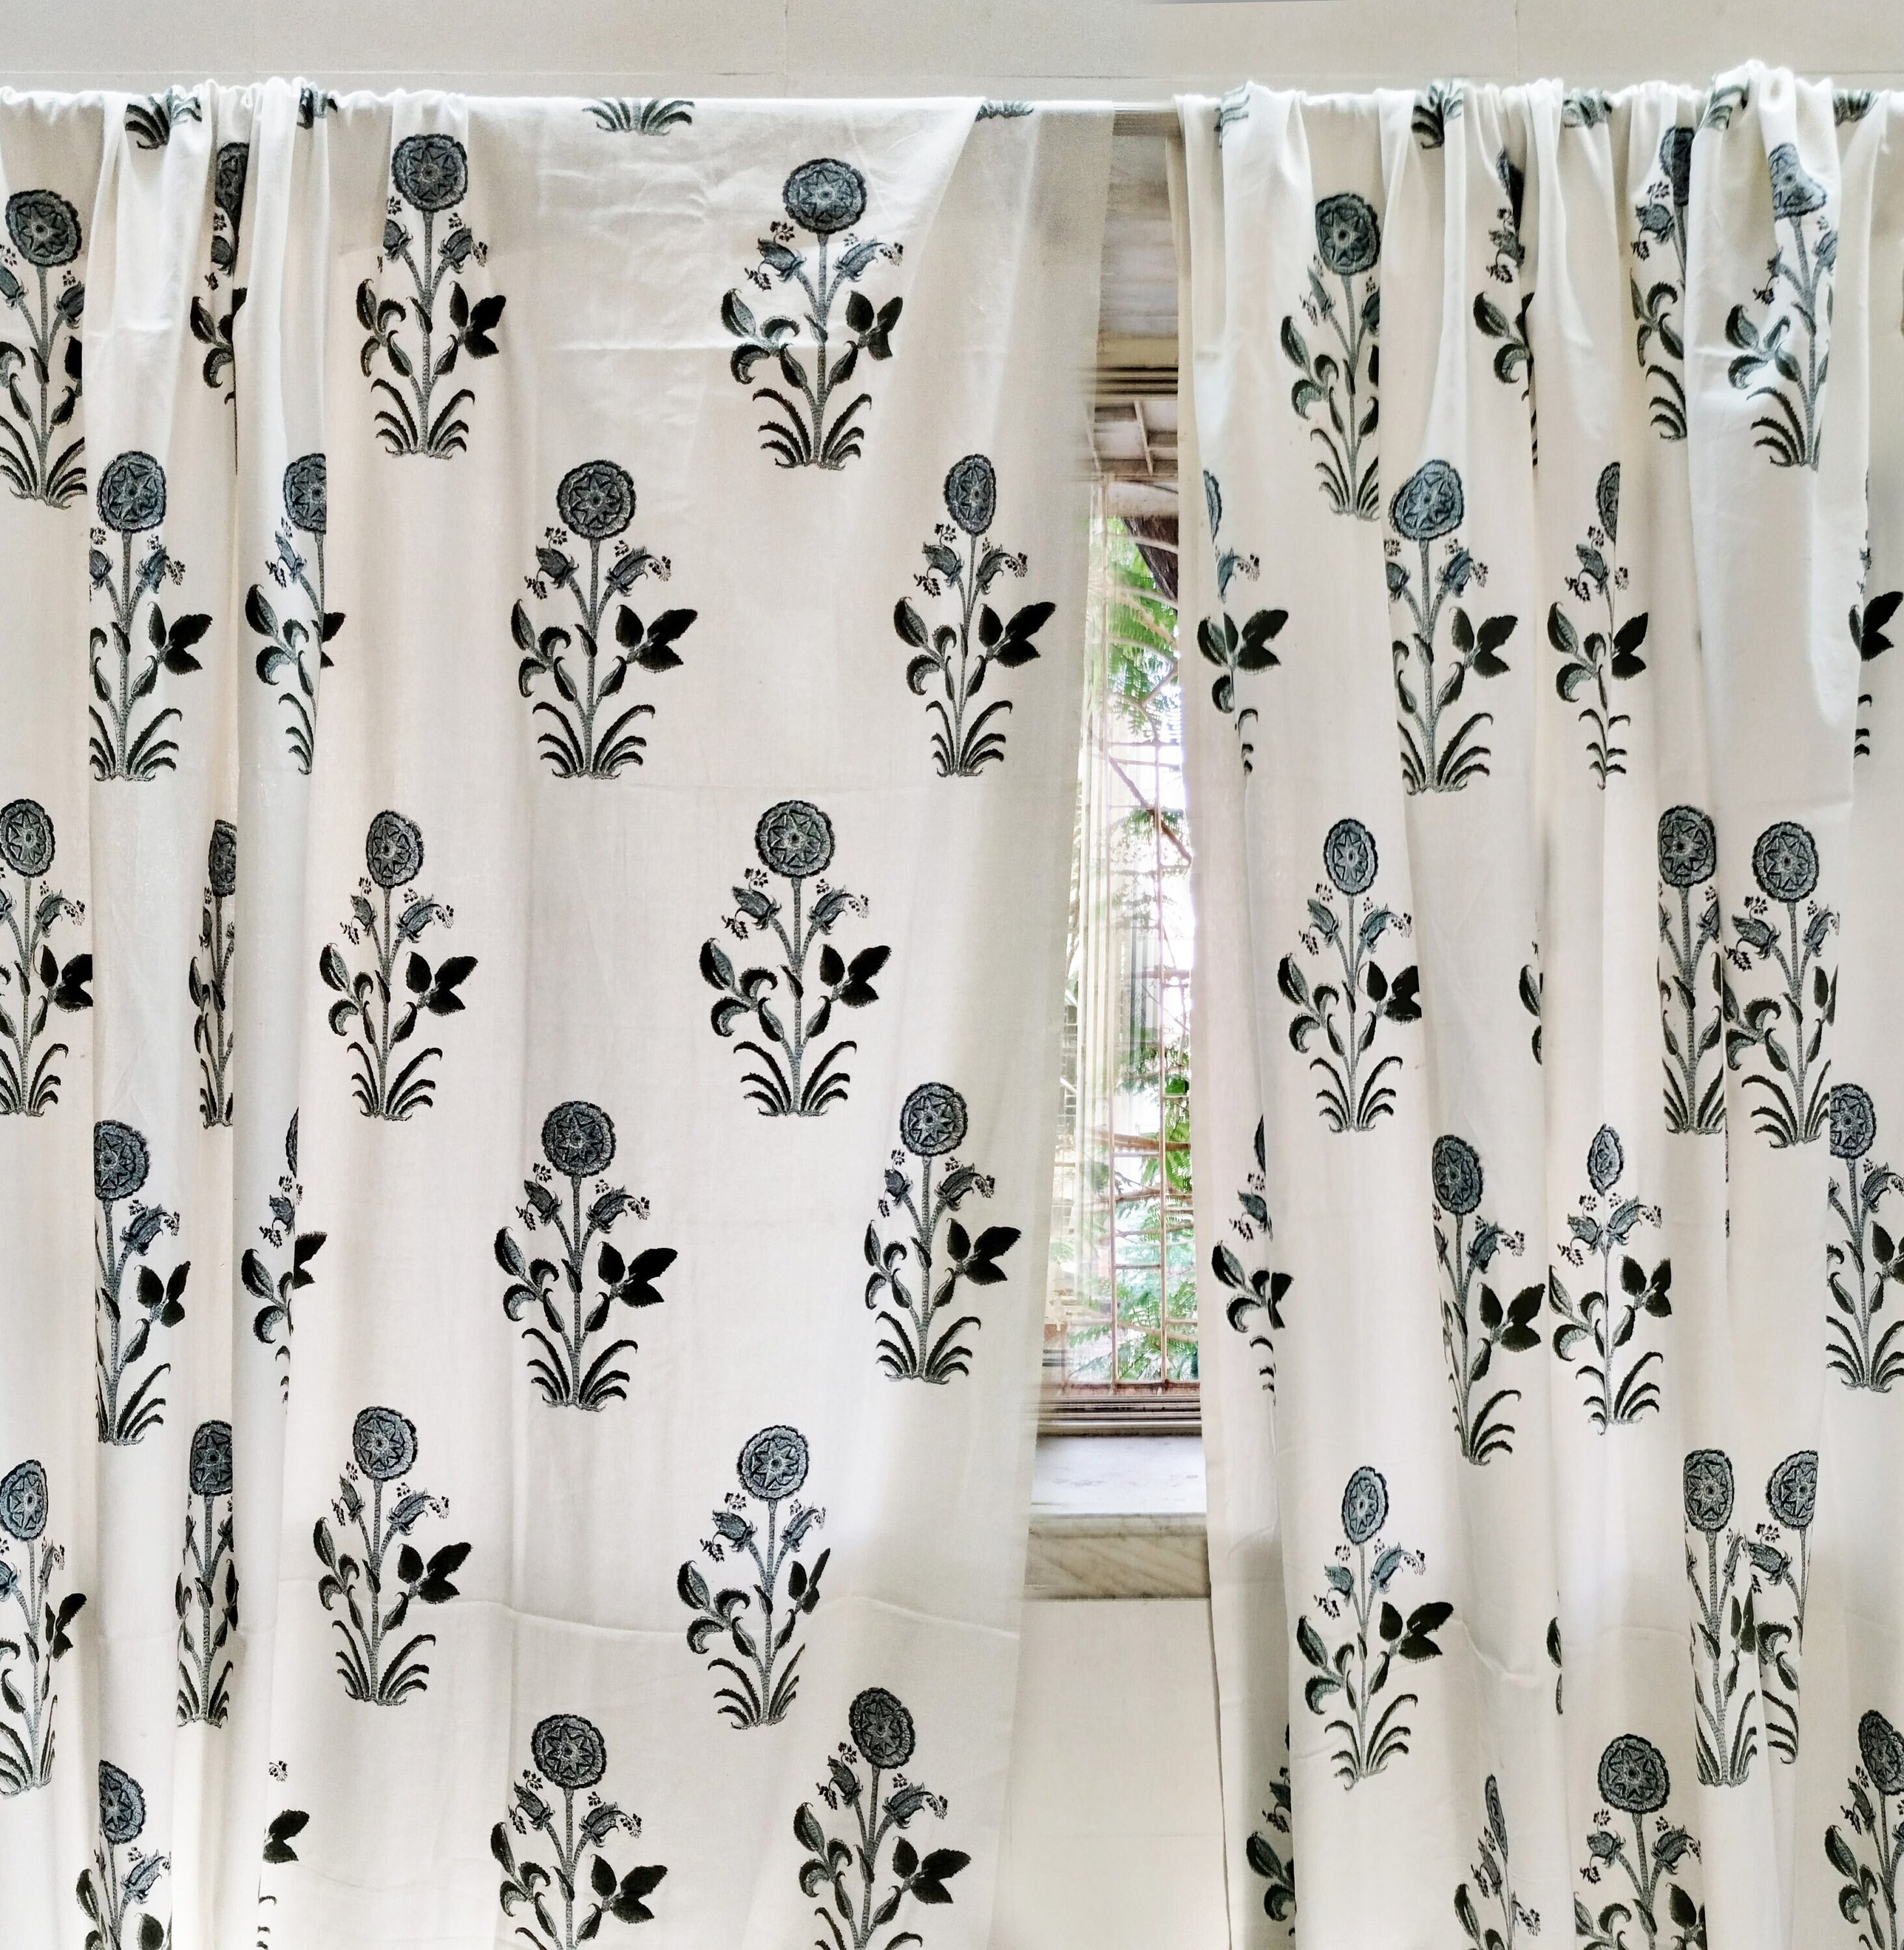  Magnetic Curtain Weights, Plastic Covered Heavy Duty No Sew  Shower Curtain Magnets, Avoid Blowing Around, Work for Drapery, Tablecloth,  Flag, Outdoor Curtain Liner (Black, 12 Sets) : Home & Kitchen